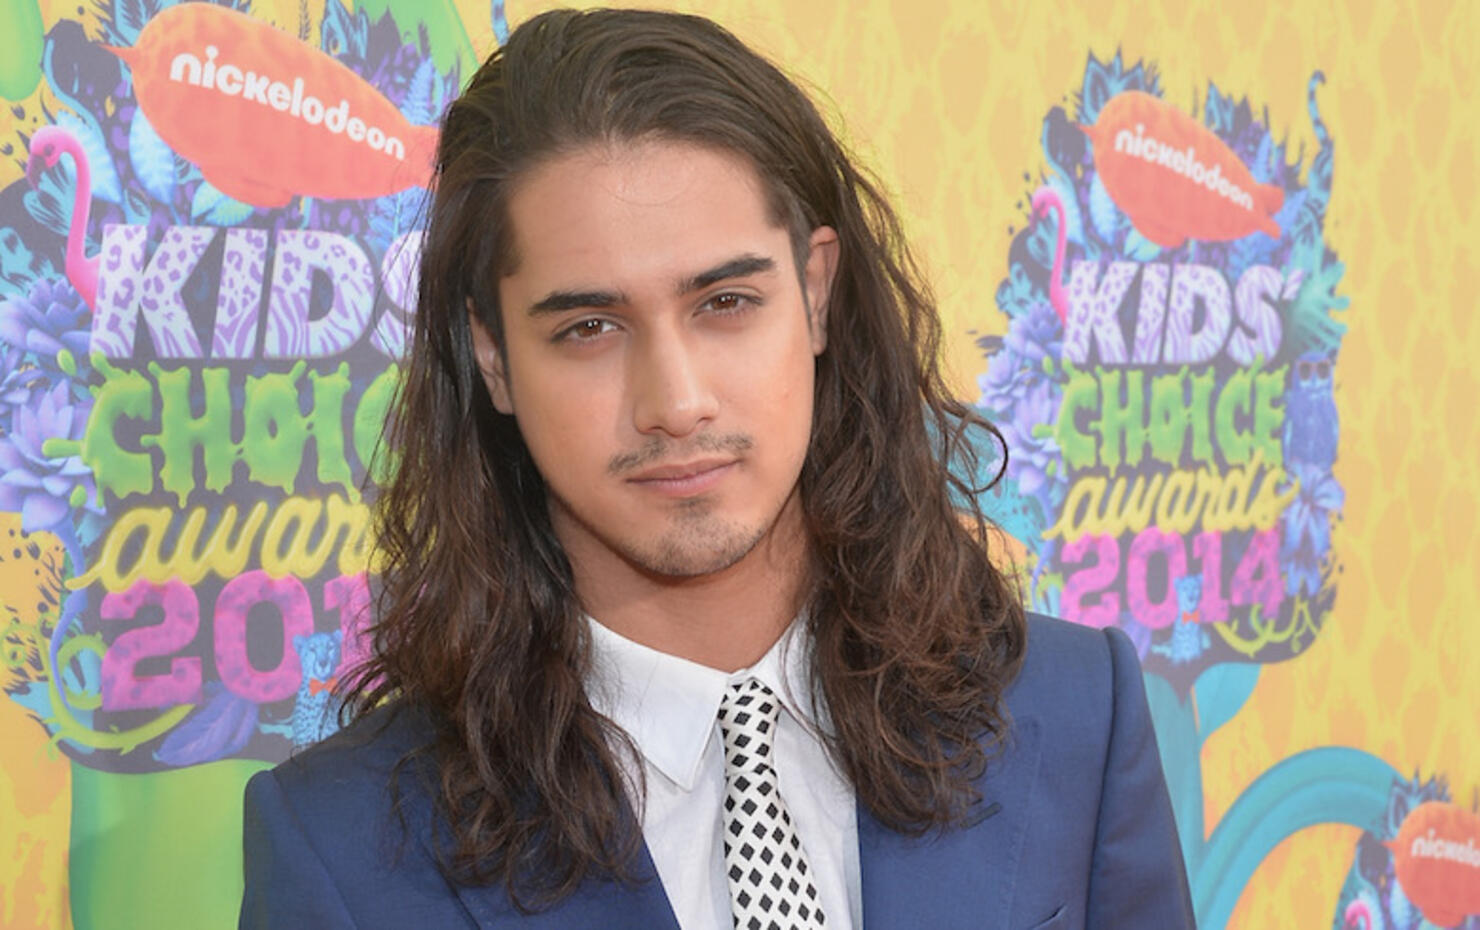 Nickelodeon's 27th Annual Kids' Choice Awards - Red Carpet